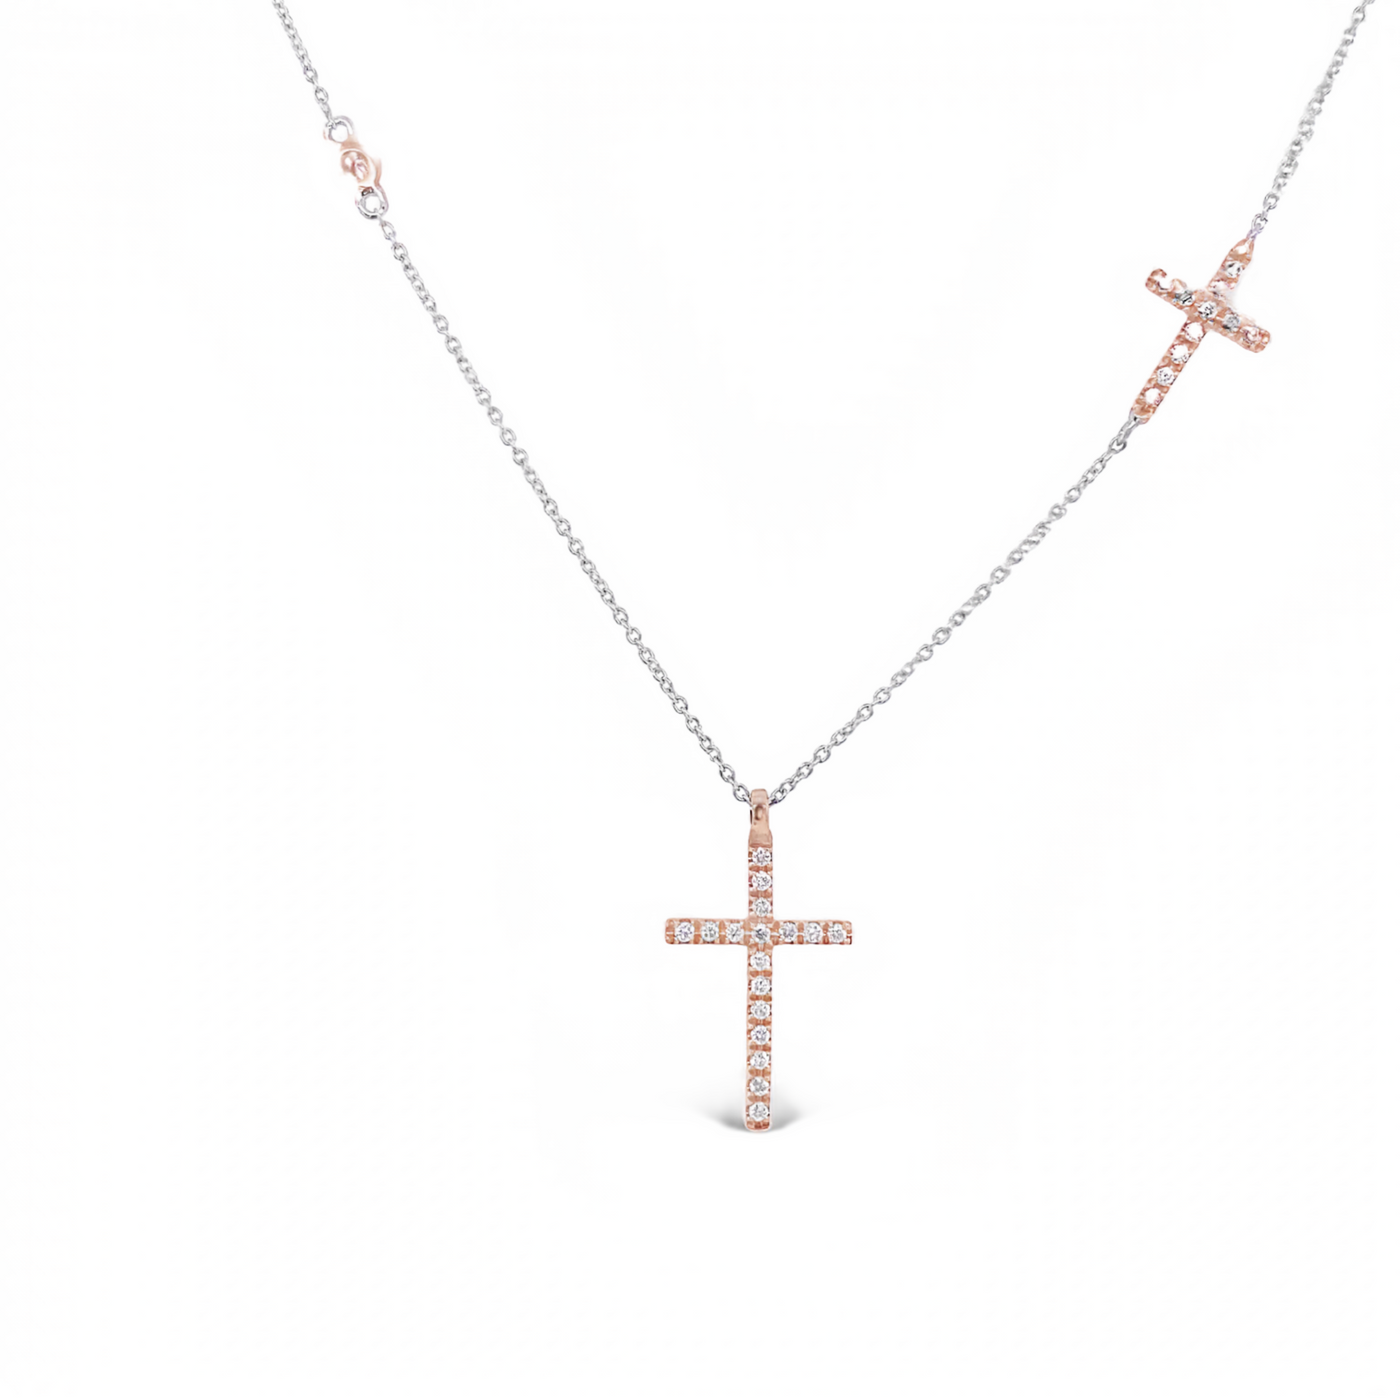 18 Karat White and Rose Gold Double Diamond Cross Necklace